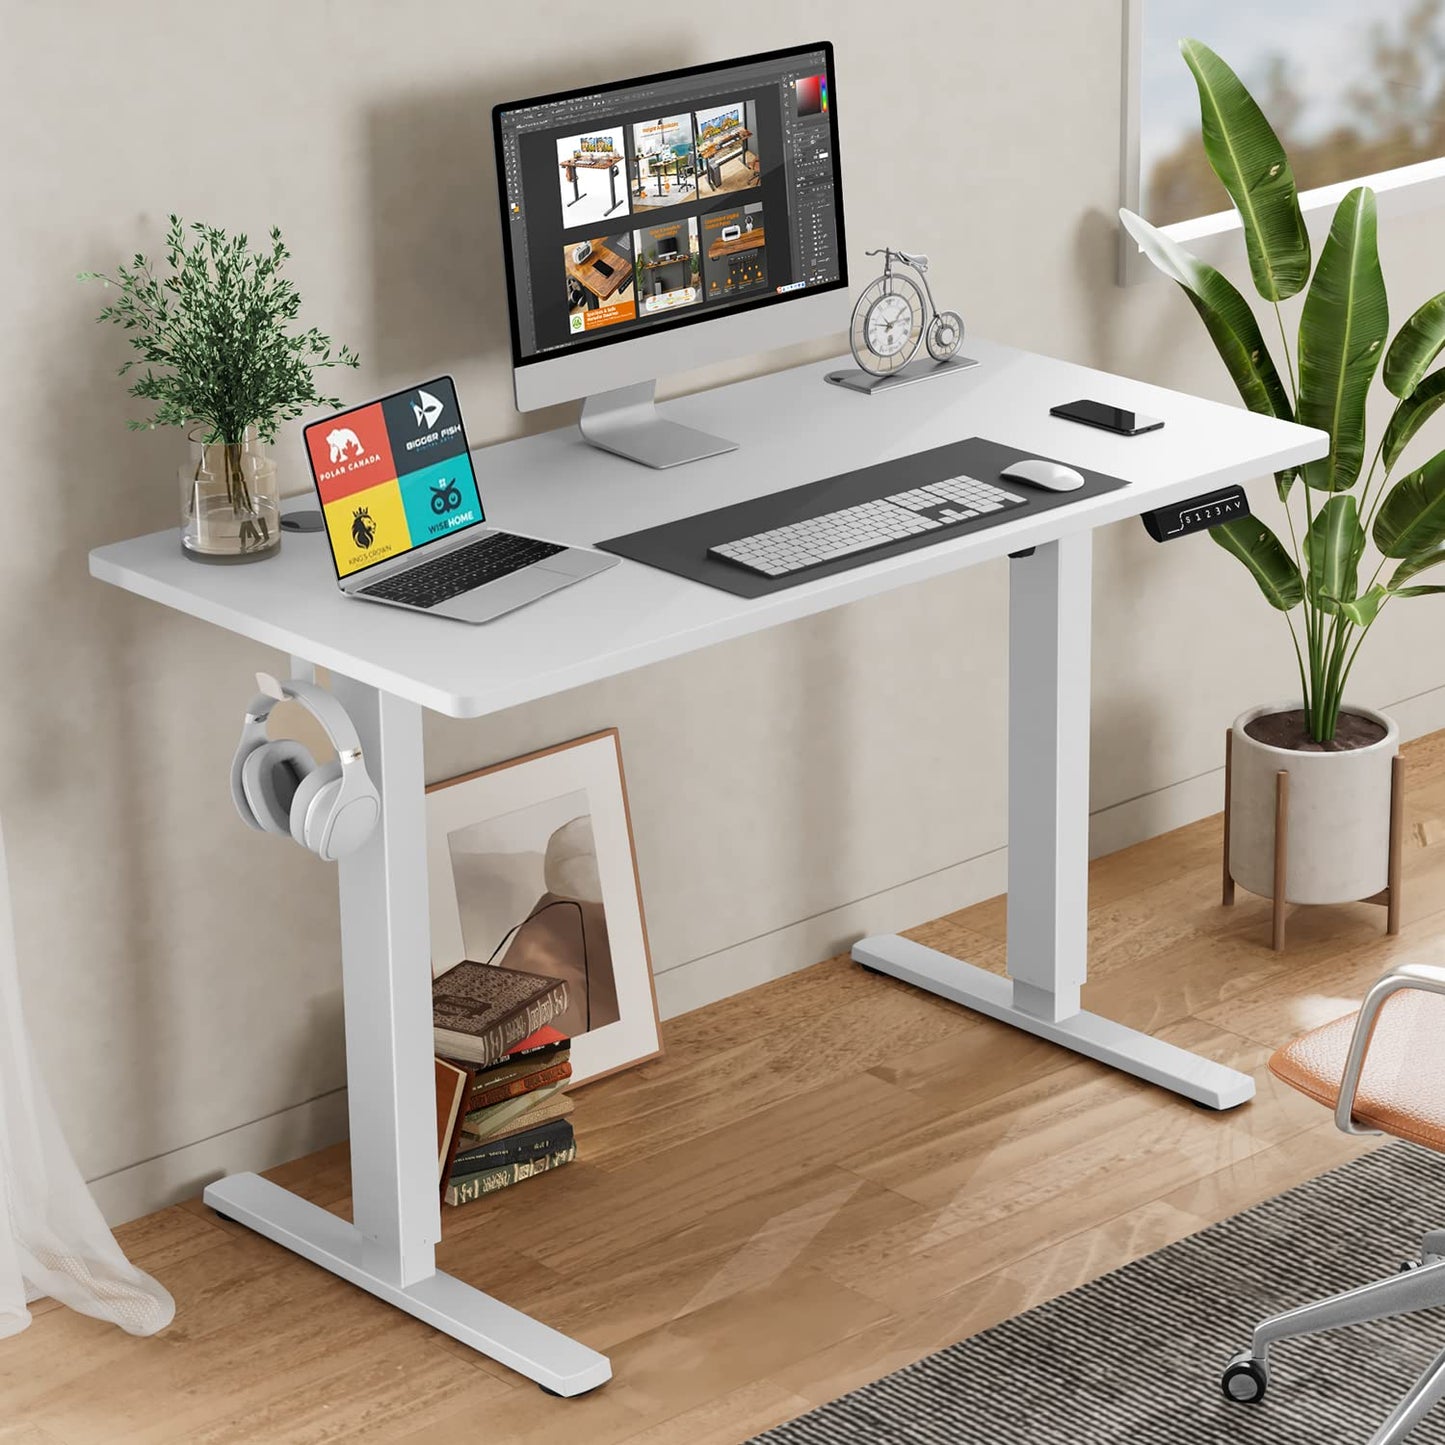 Sweetcrispy Standing Desk Adjustable Height, 48inch Electric Sit Stand up Desk for Home Office, Modern Rising Work Table for Computer Laptop, Lift